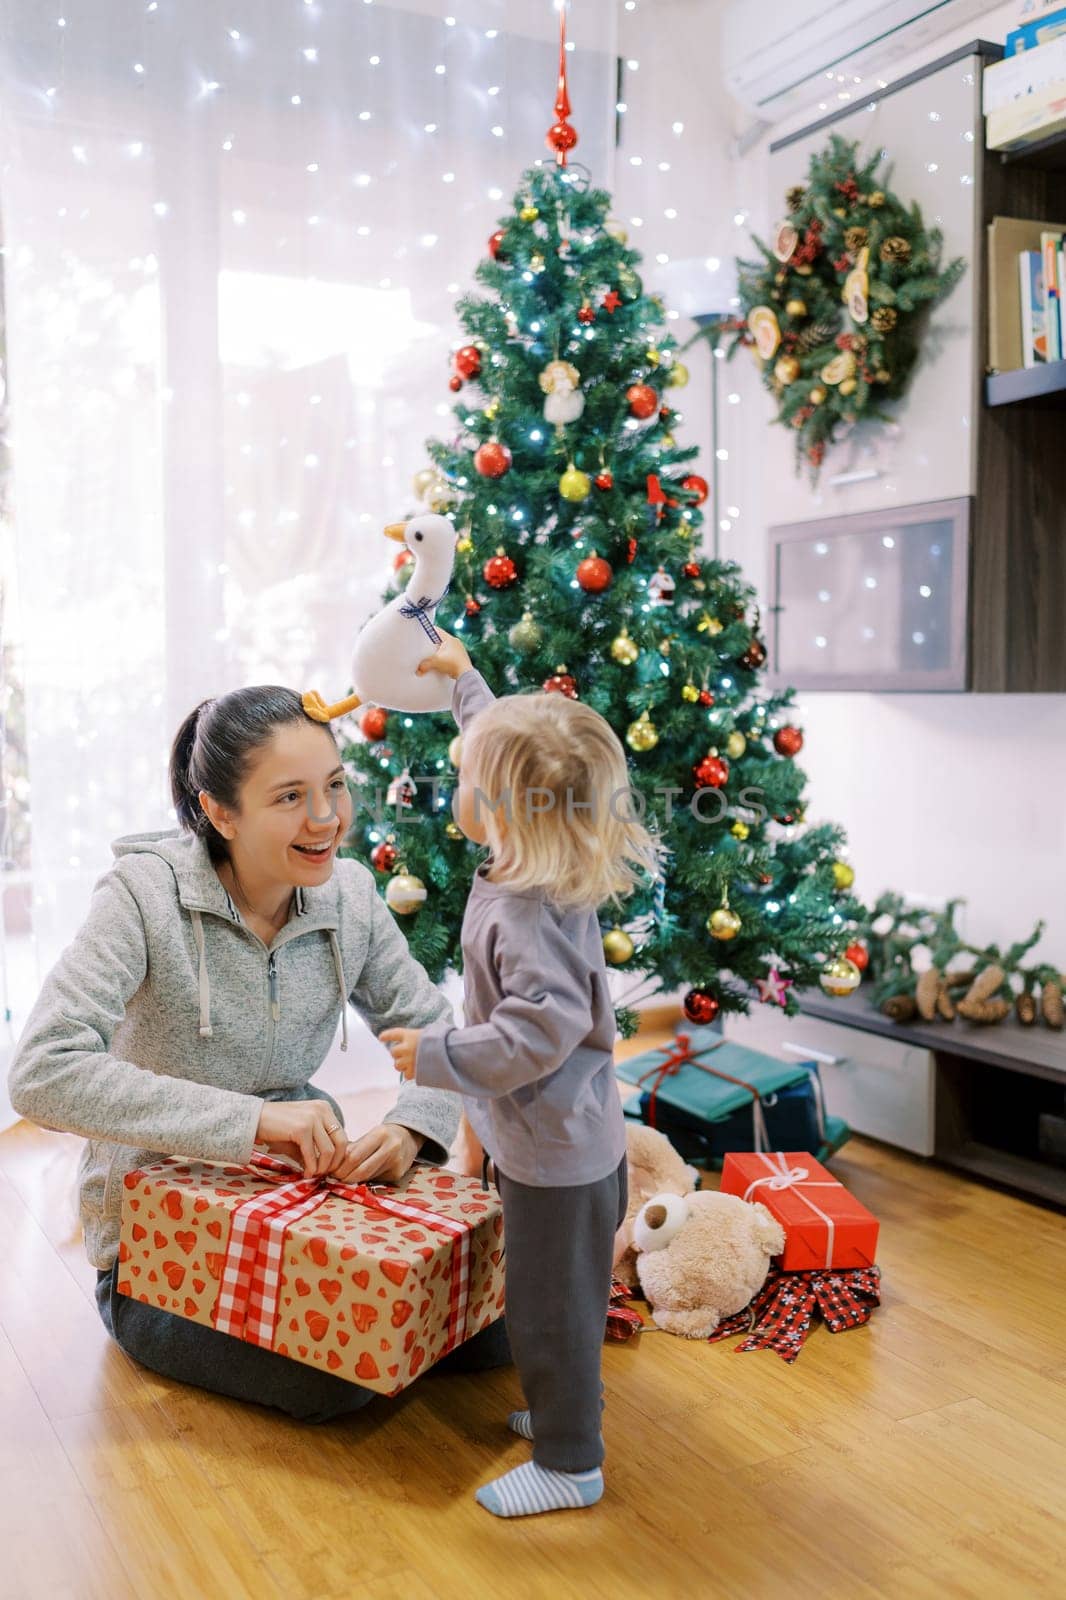 Little girl touches her mother head with a toy duck while she unpacks a gift near the Christmas tree by Nadtochiy